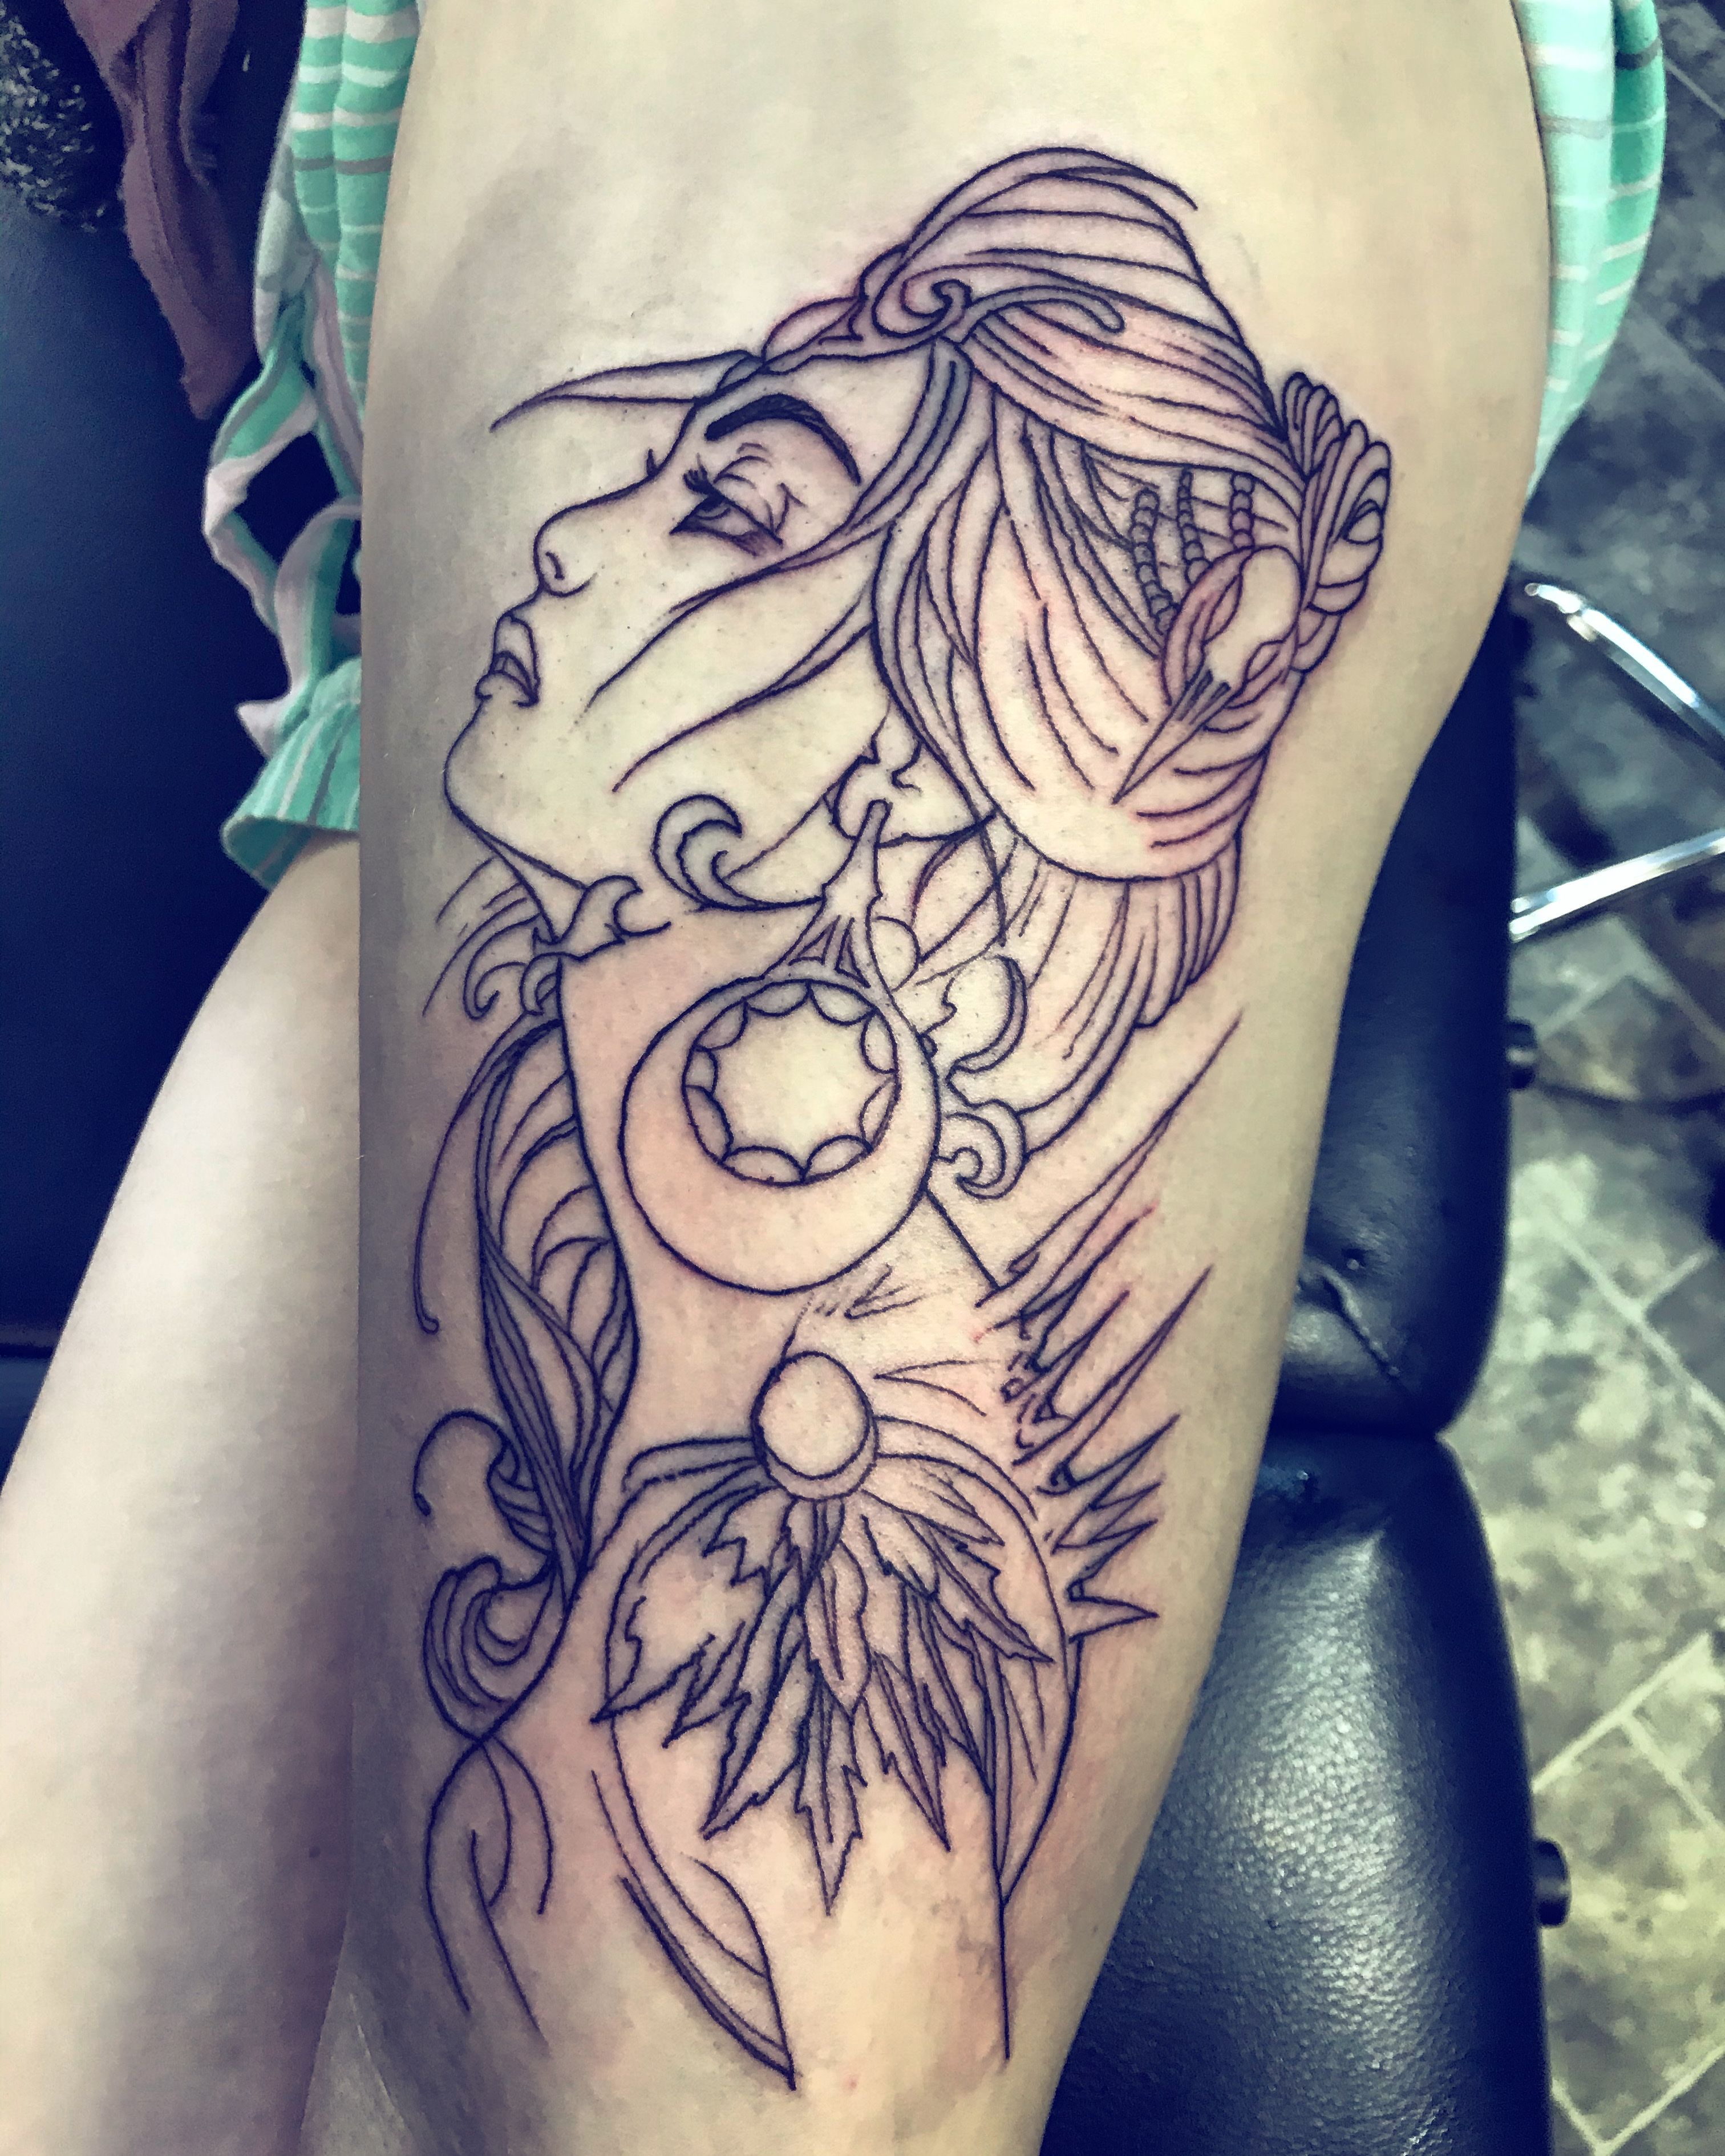 Ink Therapy Tattoo in North Las Vegas Nevada